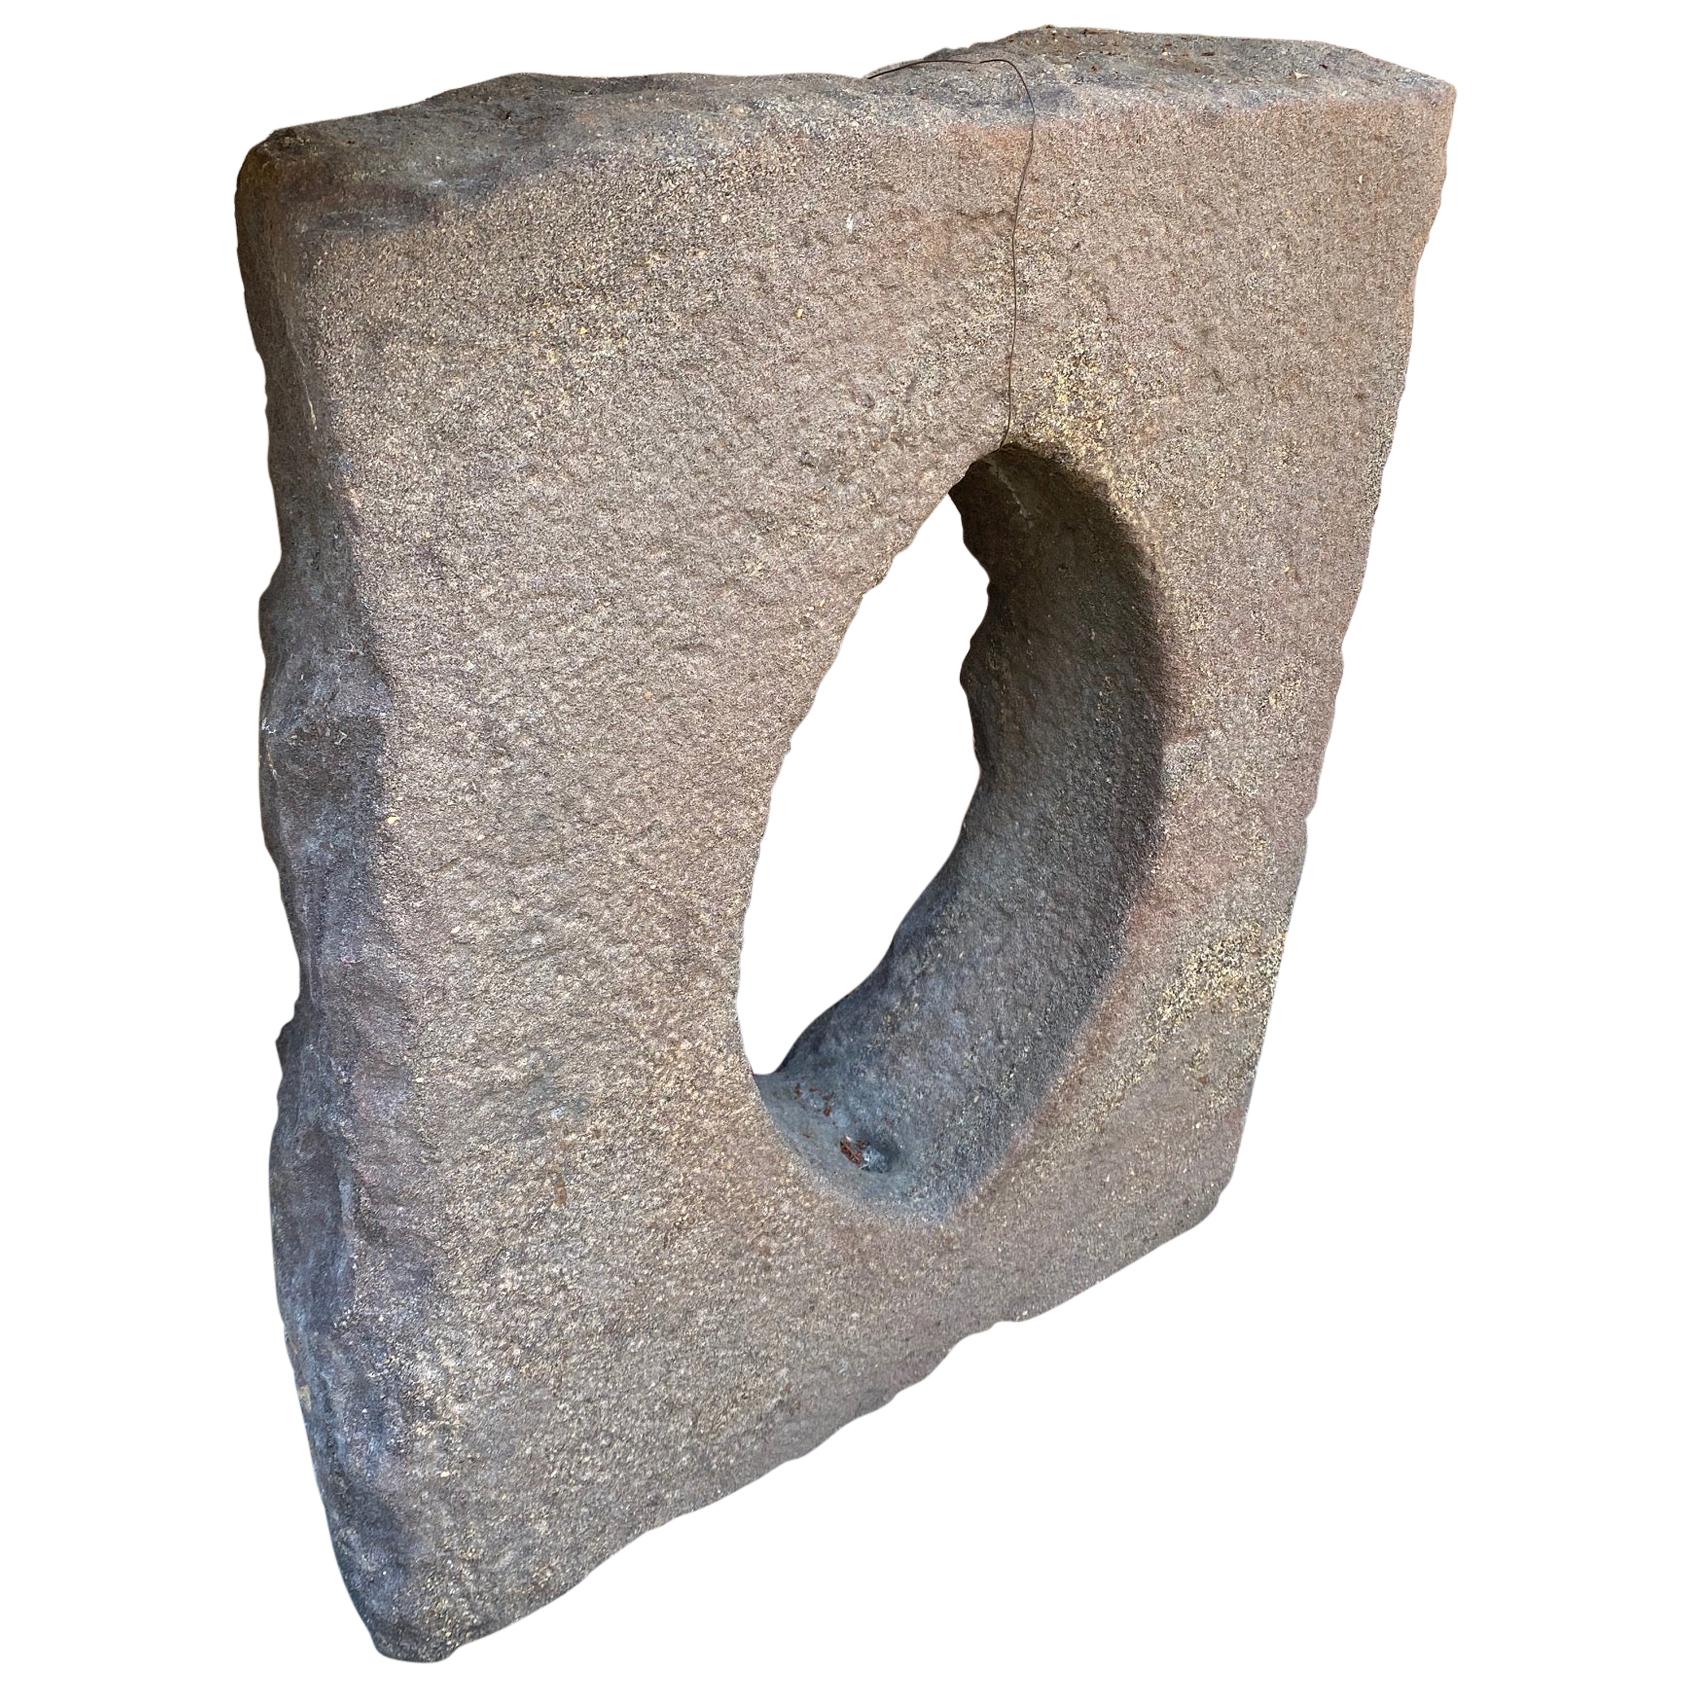 Antique Stone Window Surround Wall Fountain Back Sculpture Sink Los Angeles CA For Sale